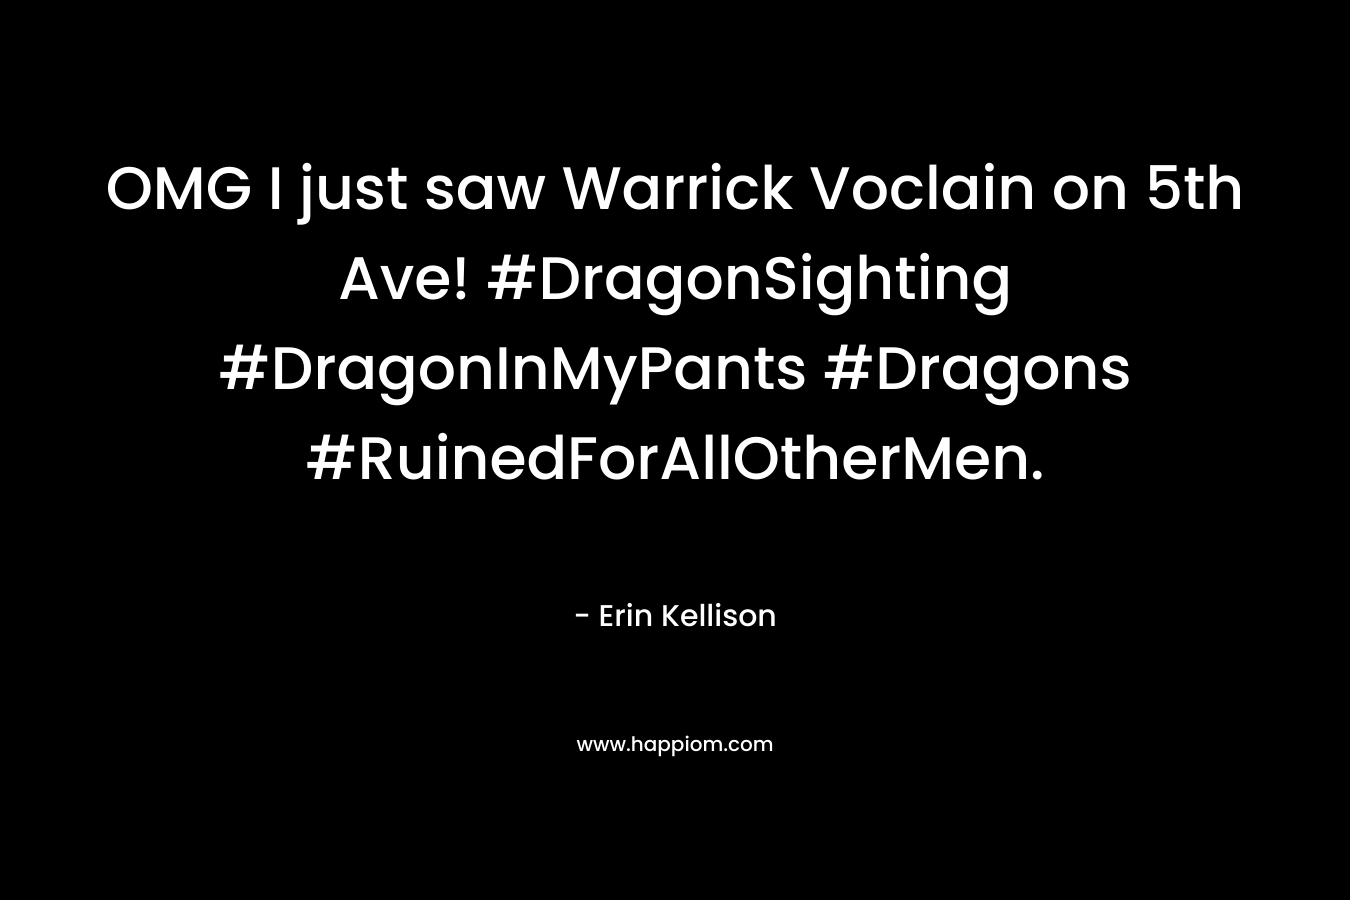 OMG I just saw Warrick Voclain on 5th Ave! #DragonSighting #DragonInMyPants #Dragons #RuinedForAllOtherMen.